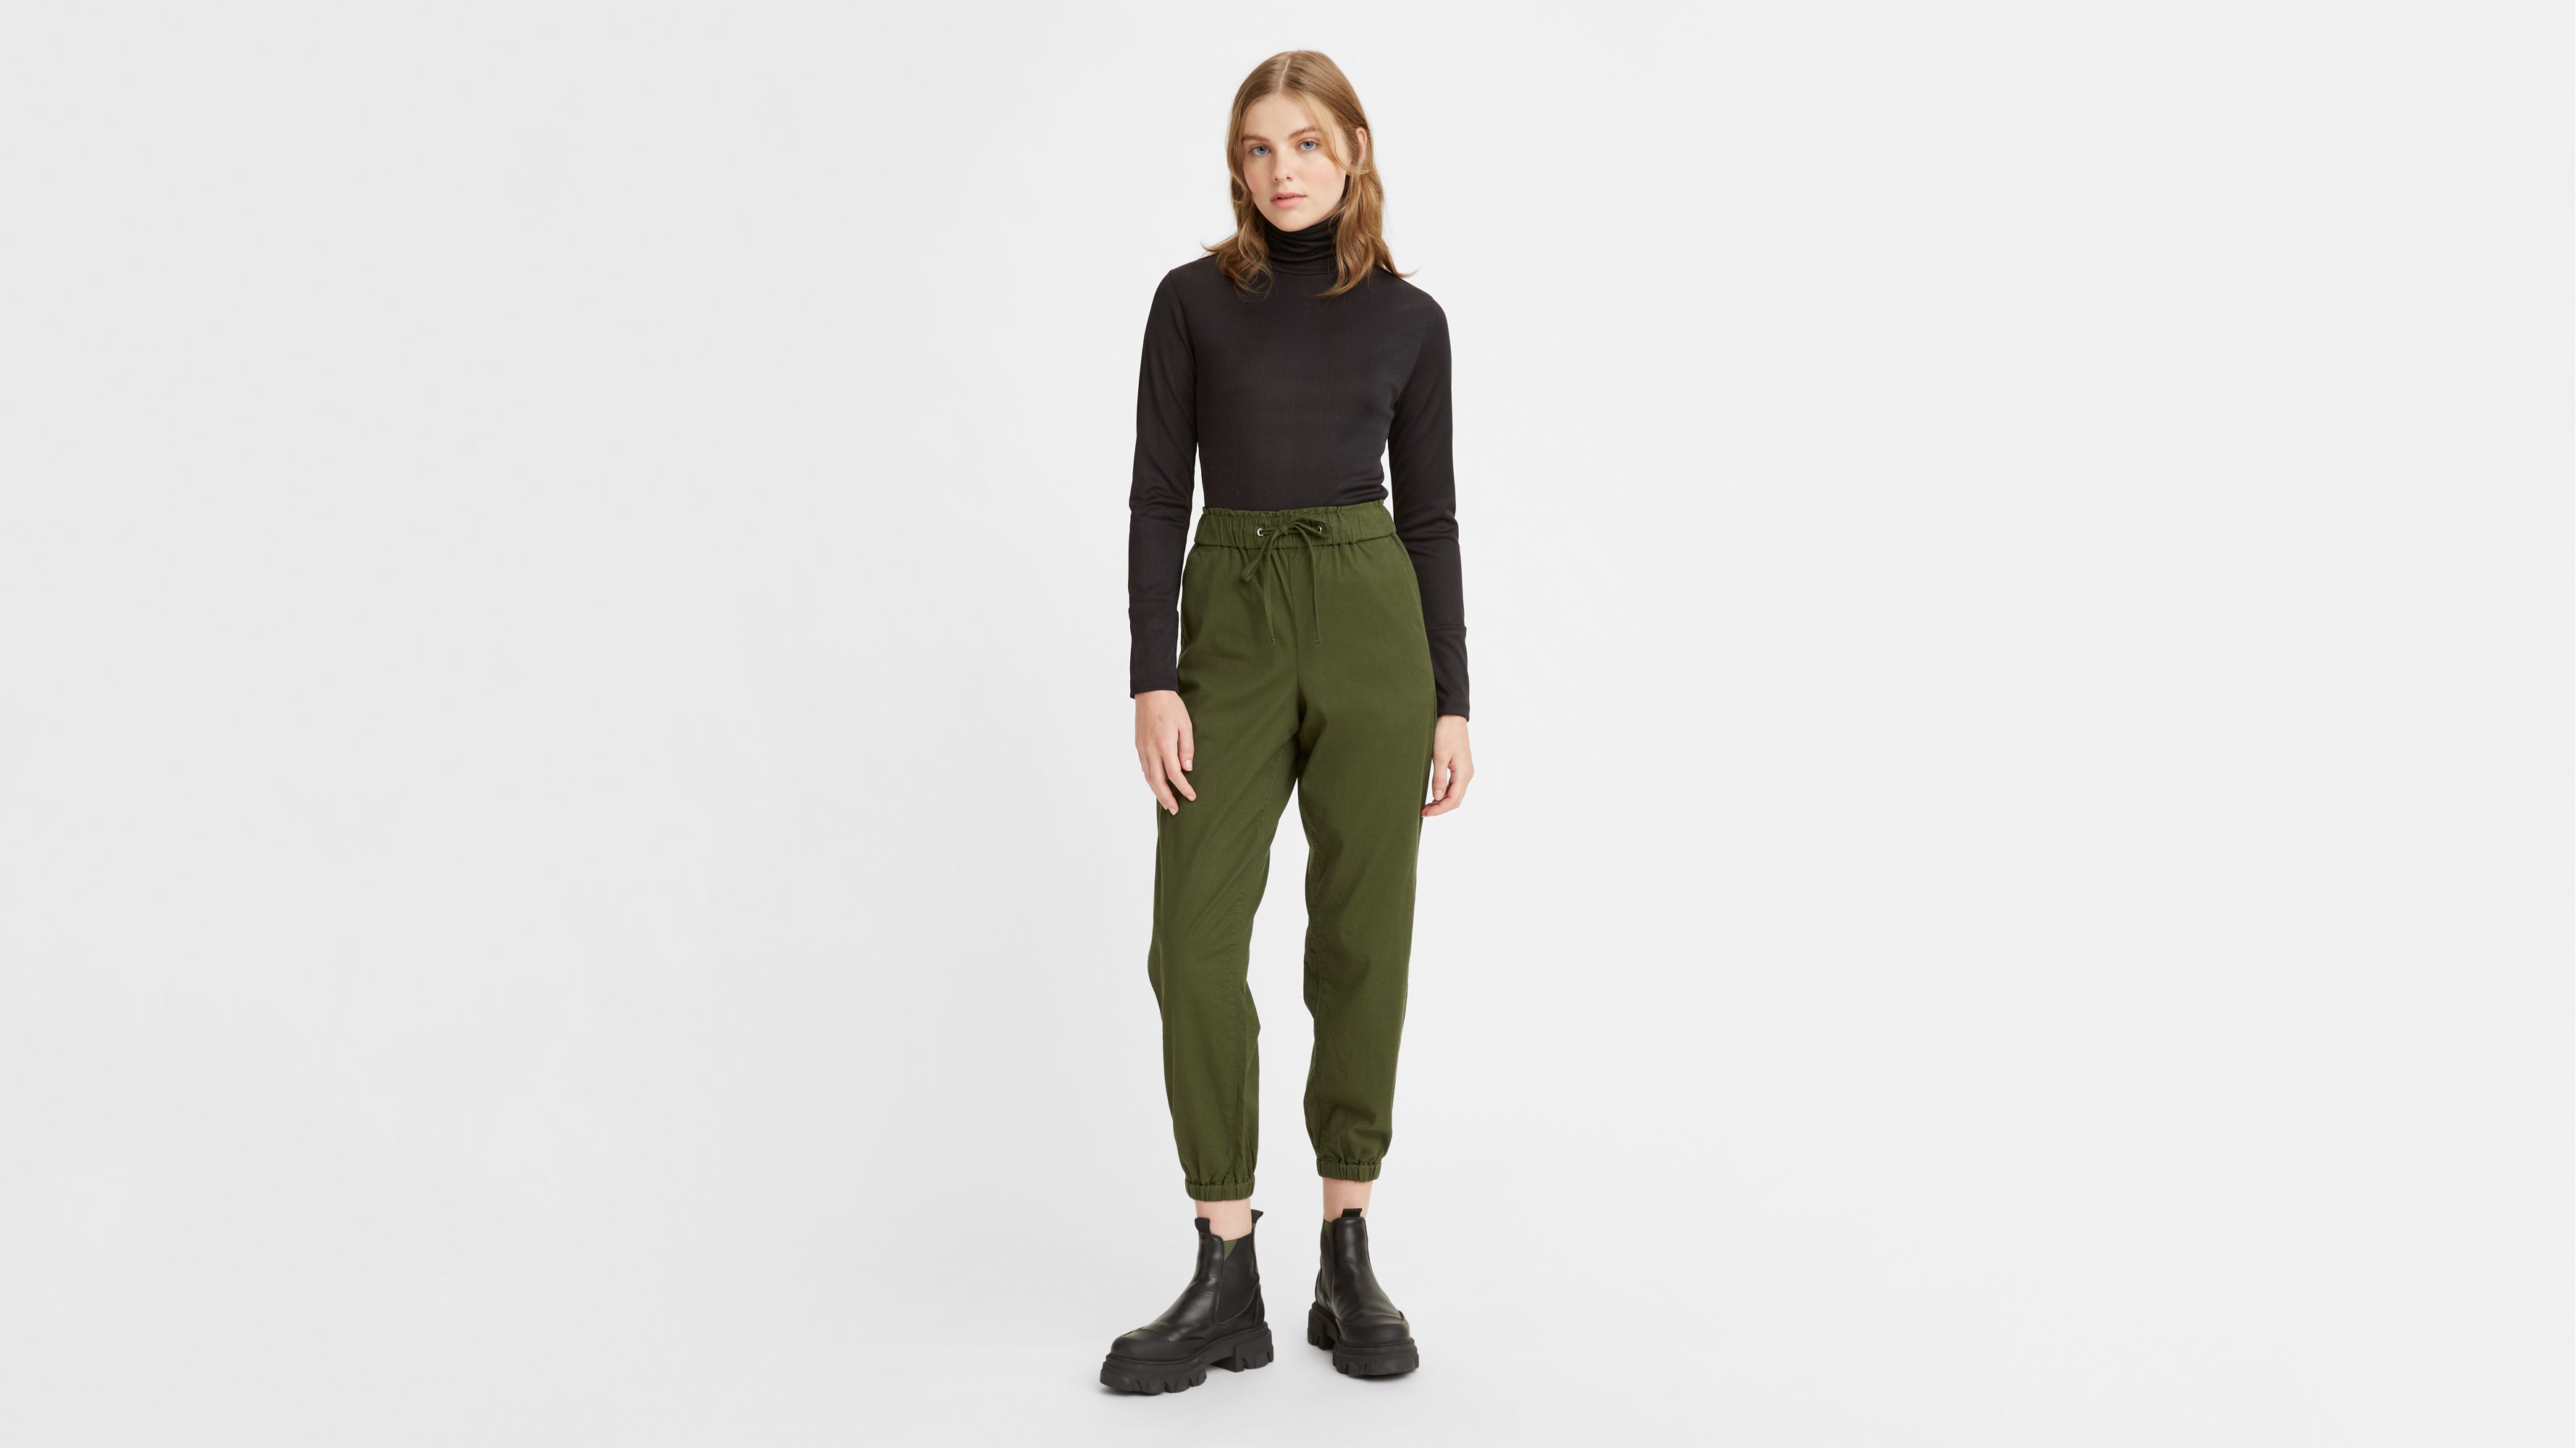 Buy Olive Green Track Pants for Women by PERFORMAX Online